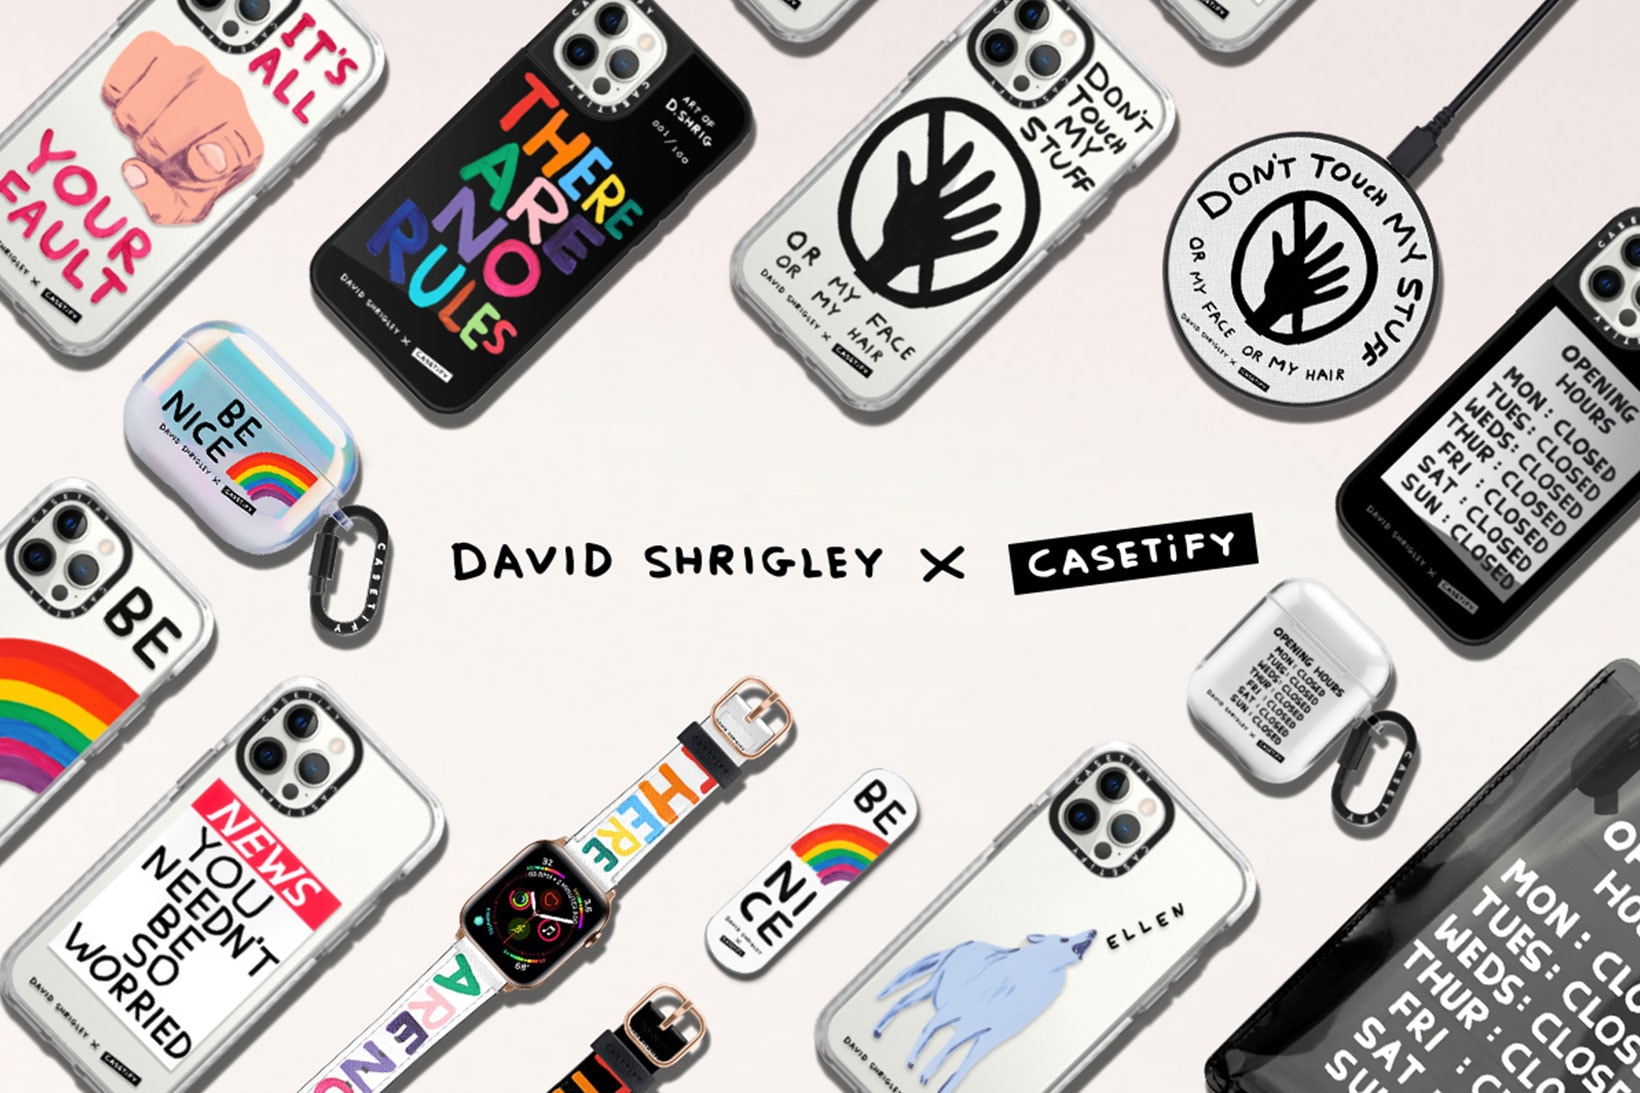 david shrigley casetify collaboration tech accessories apple iphone airpods cases